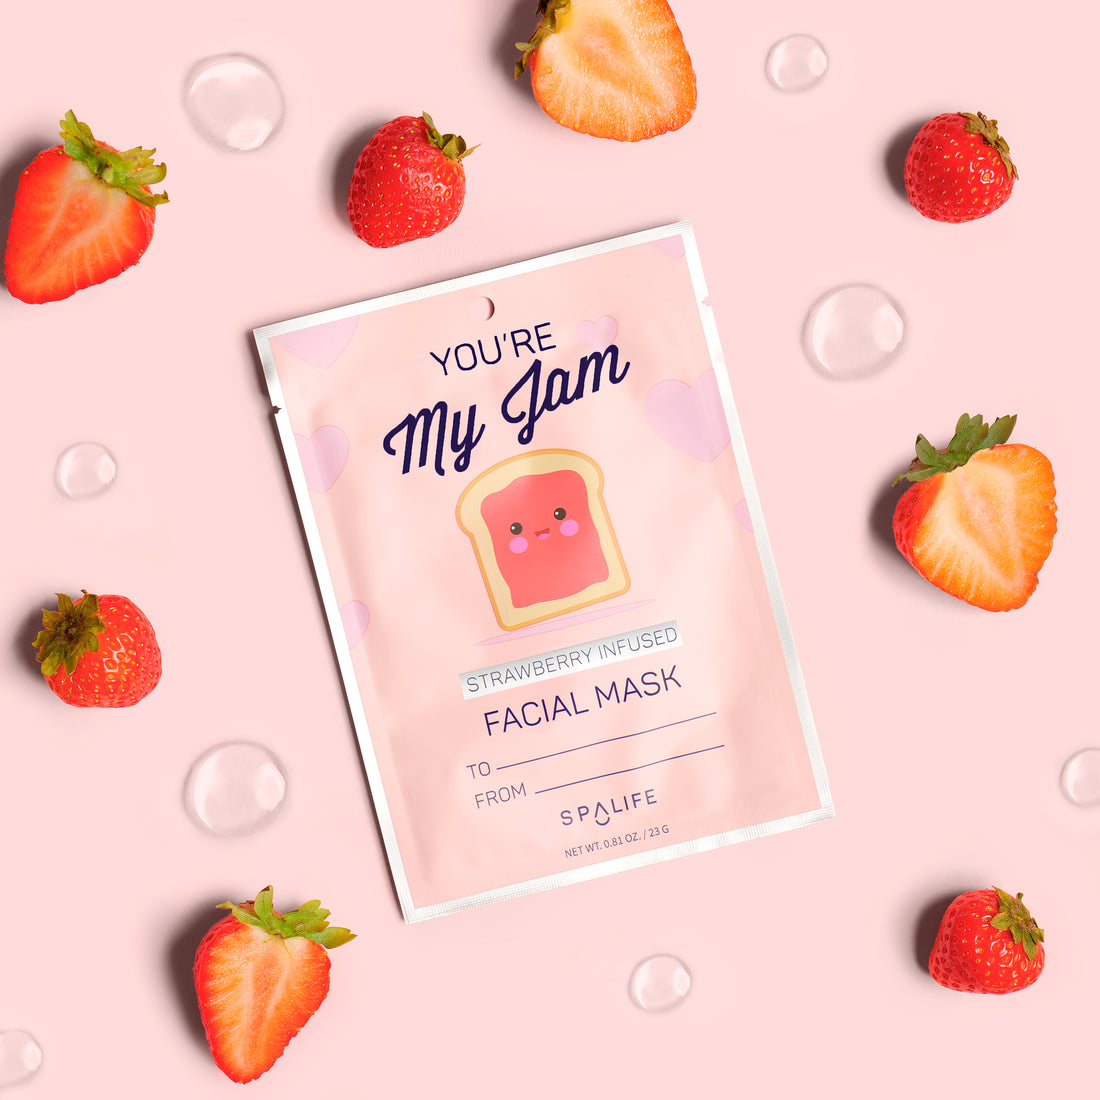 Strawberry Infused Facial Mask-151